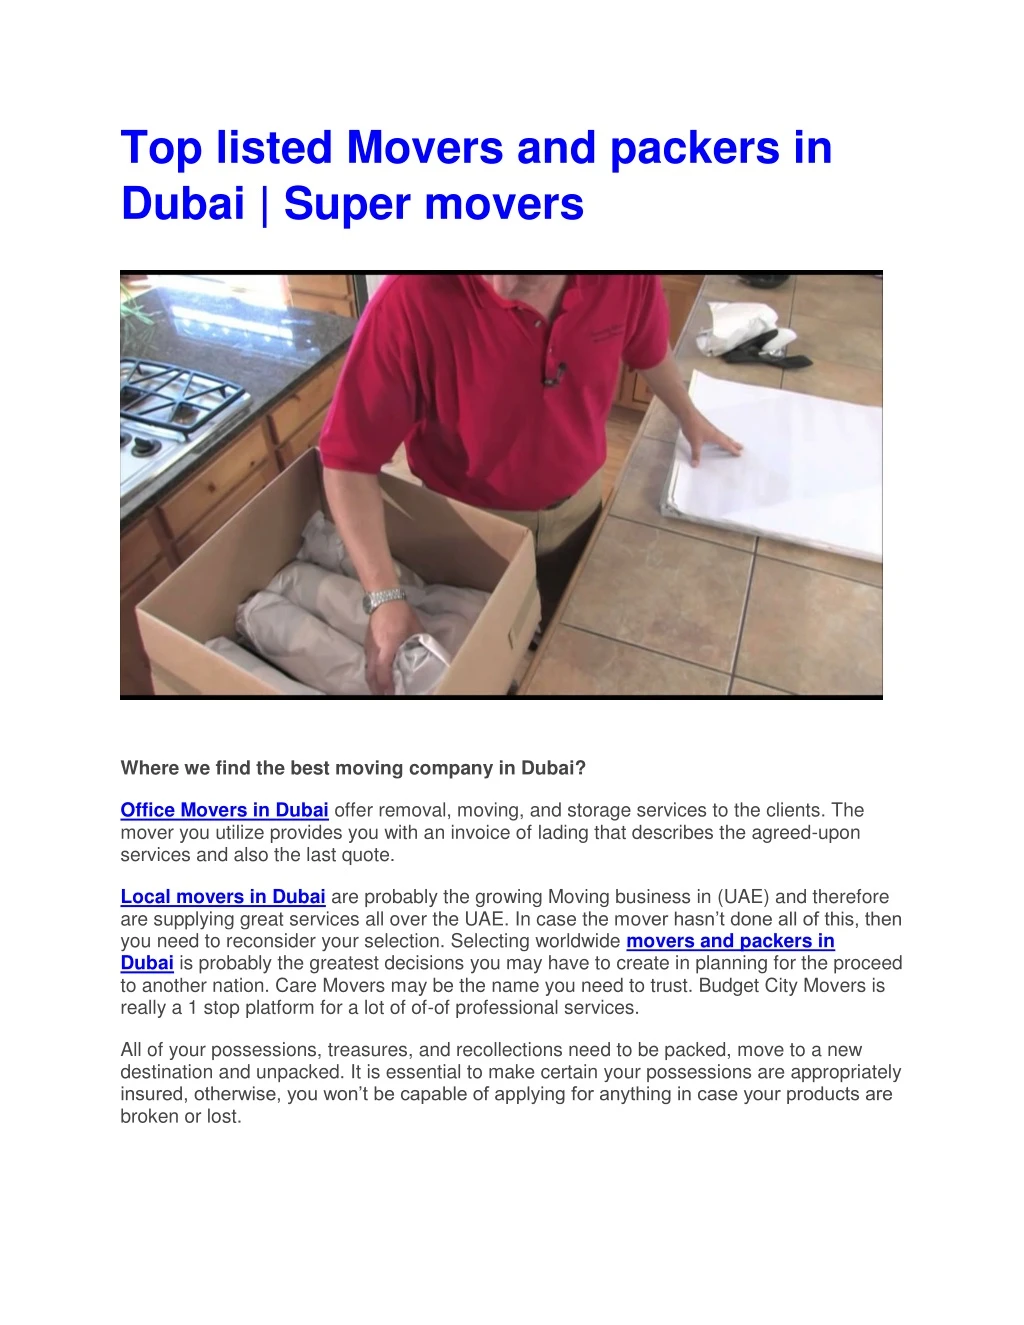 top listed movers and packers in dubai super